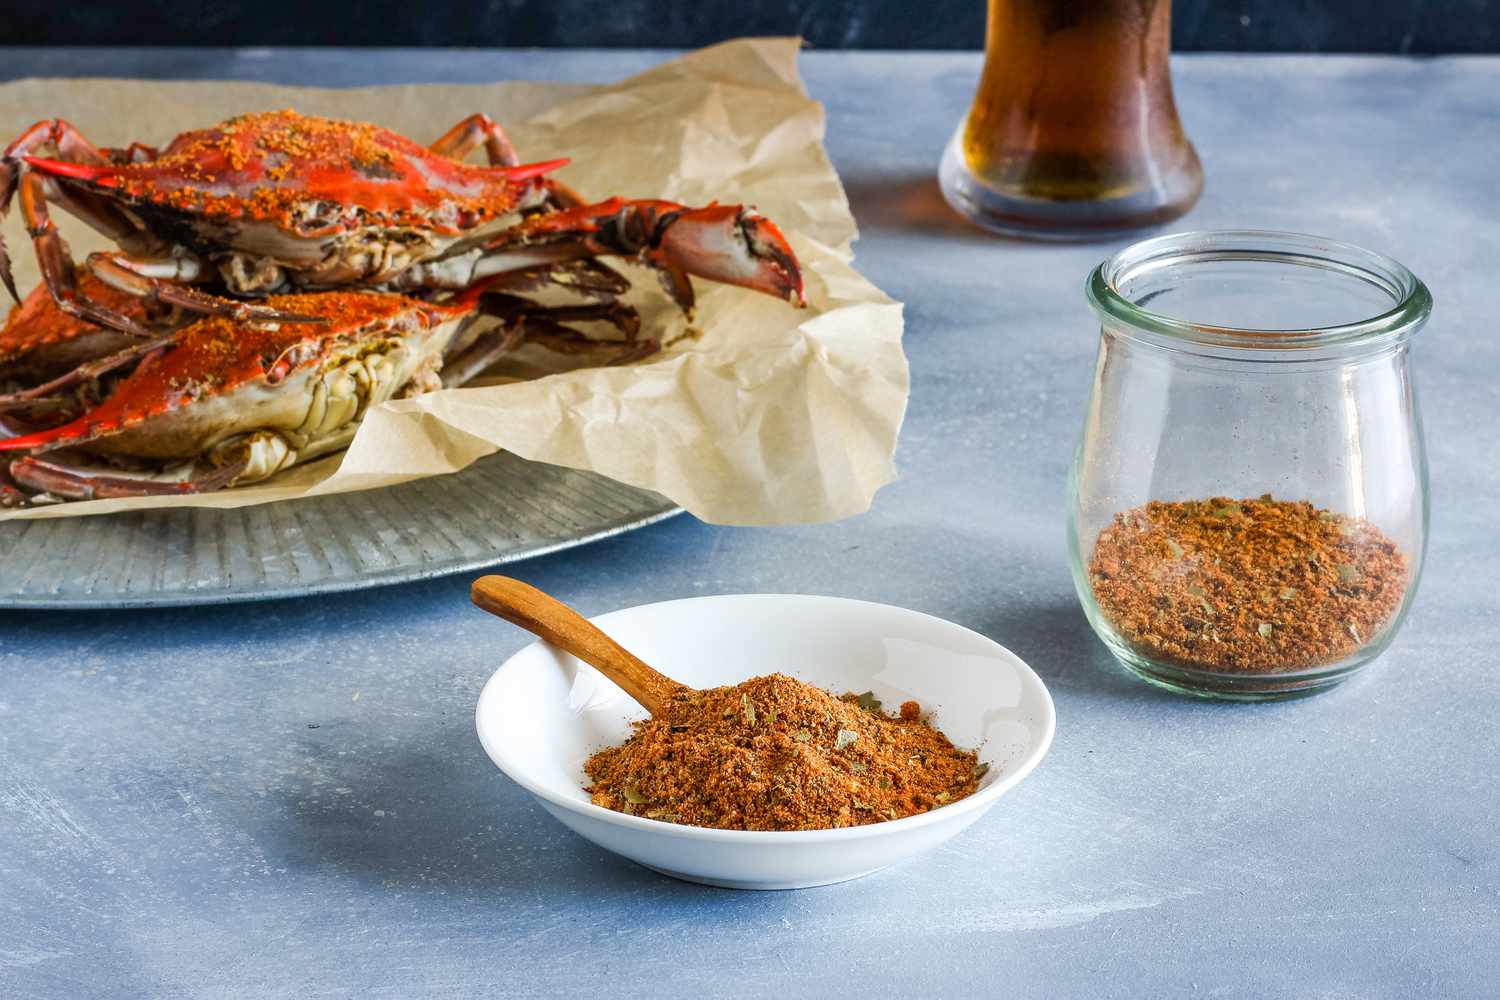 Old Bay-style seasoning mix in a bowl and in a jar, crabs in the background